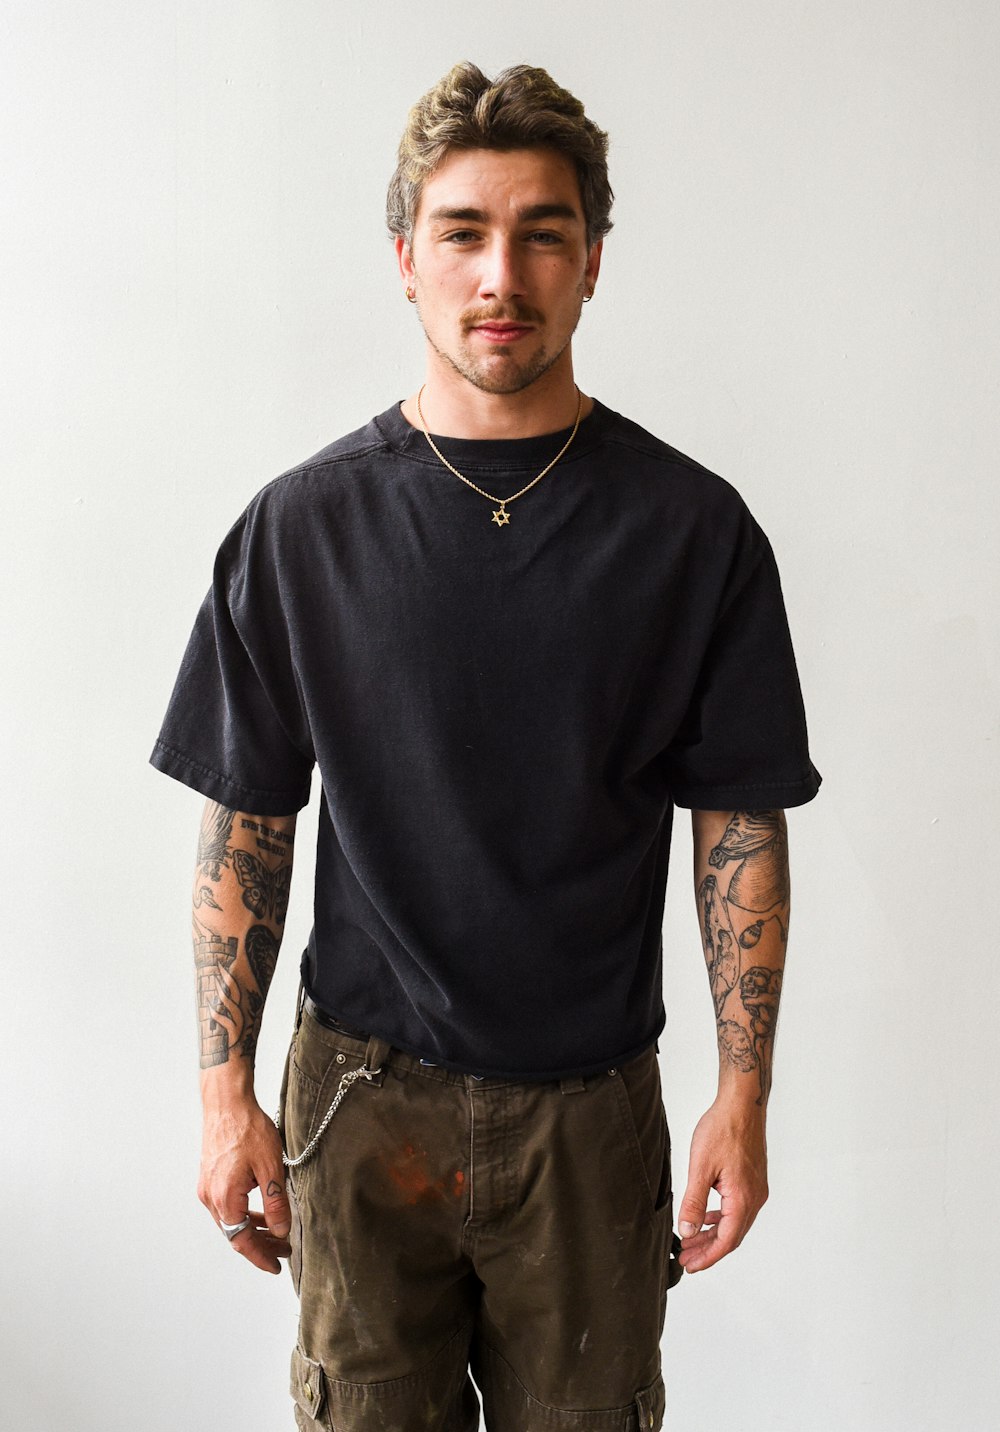 a man with tattoos standing in front of a white wall